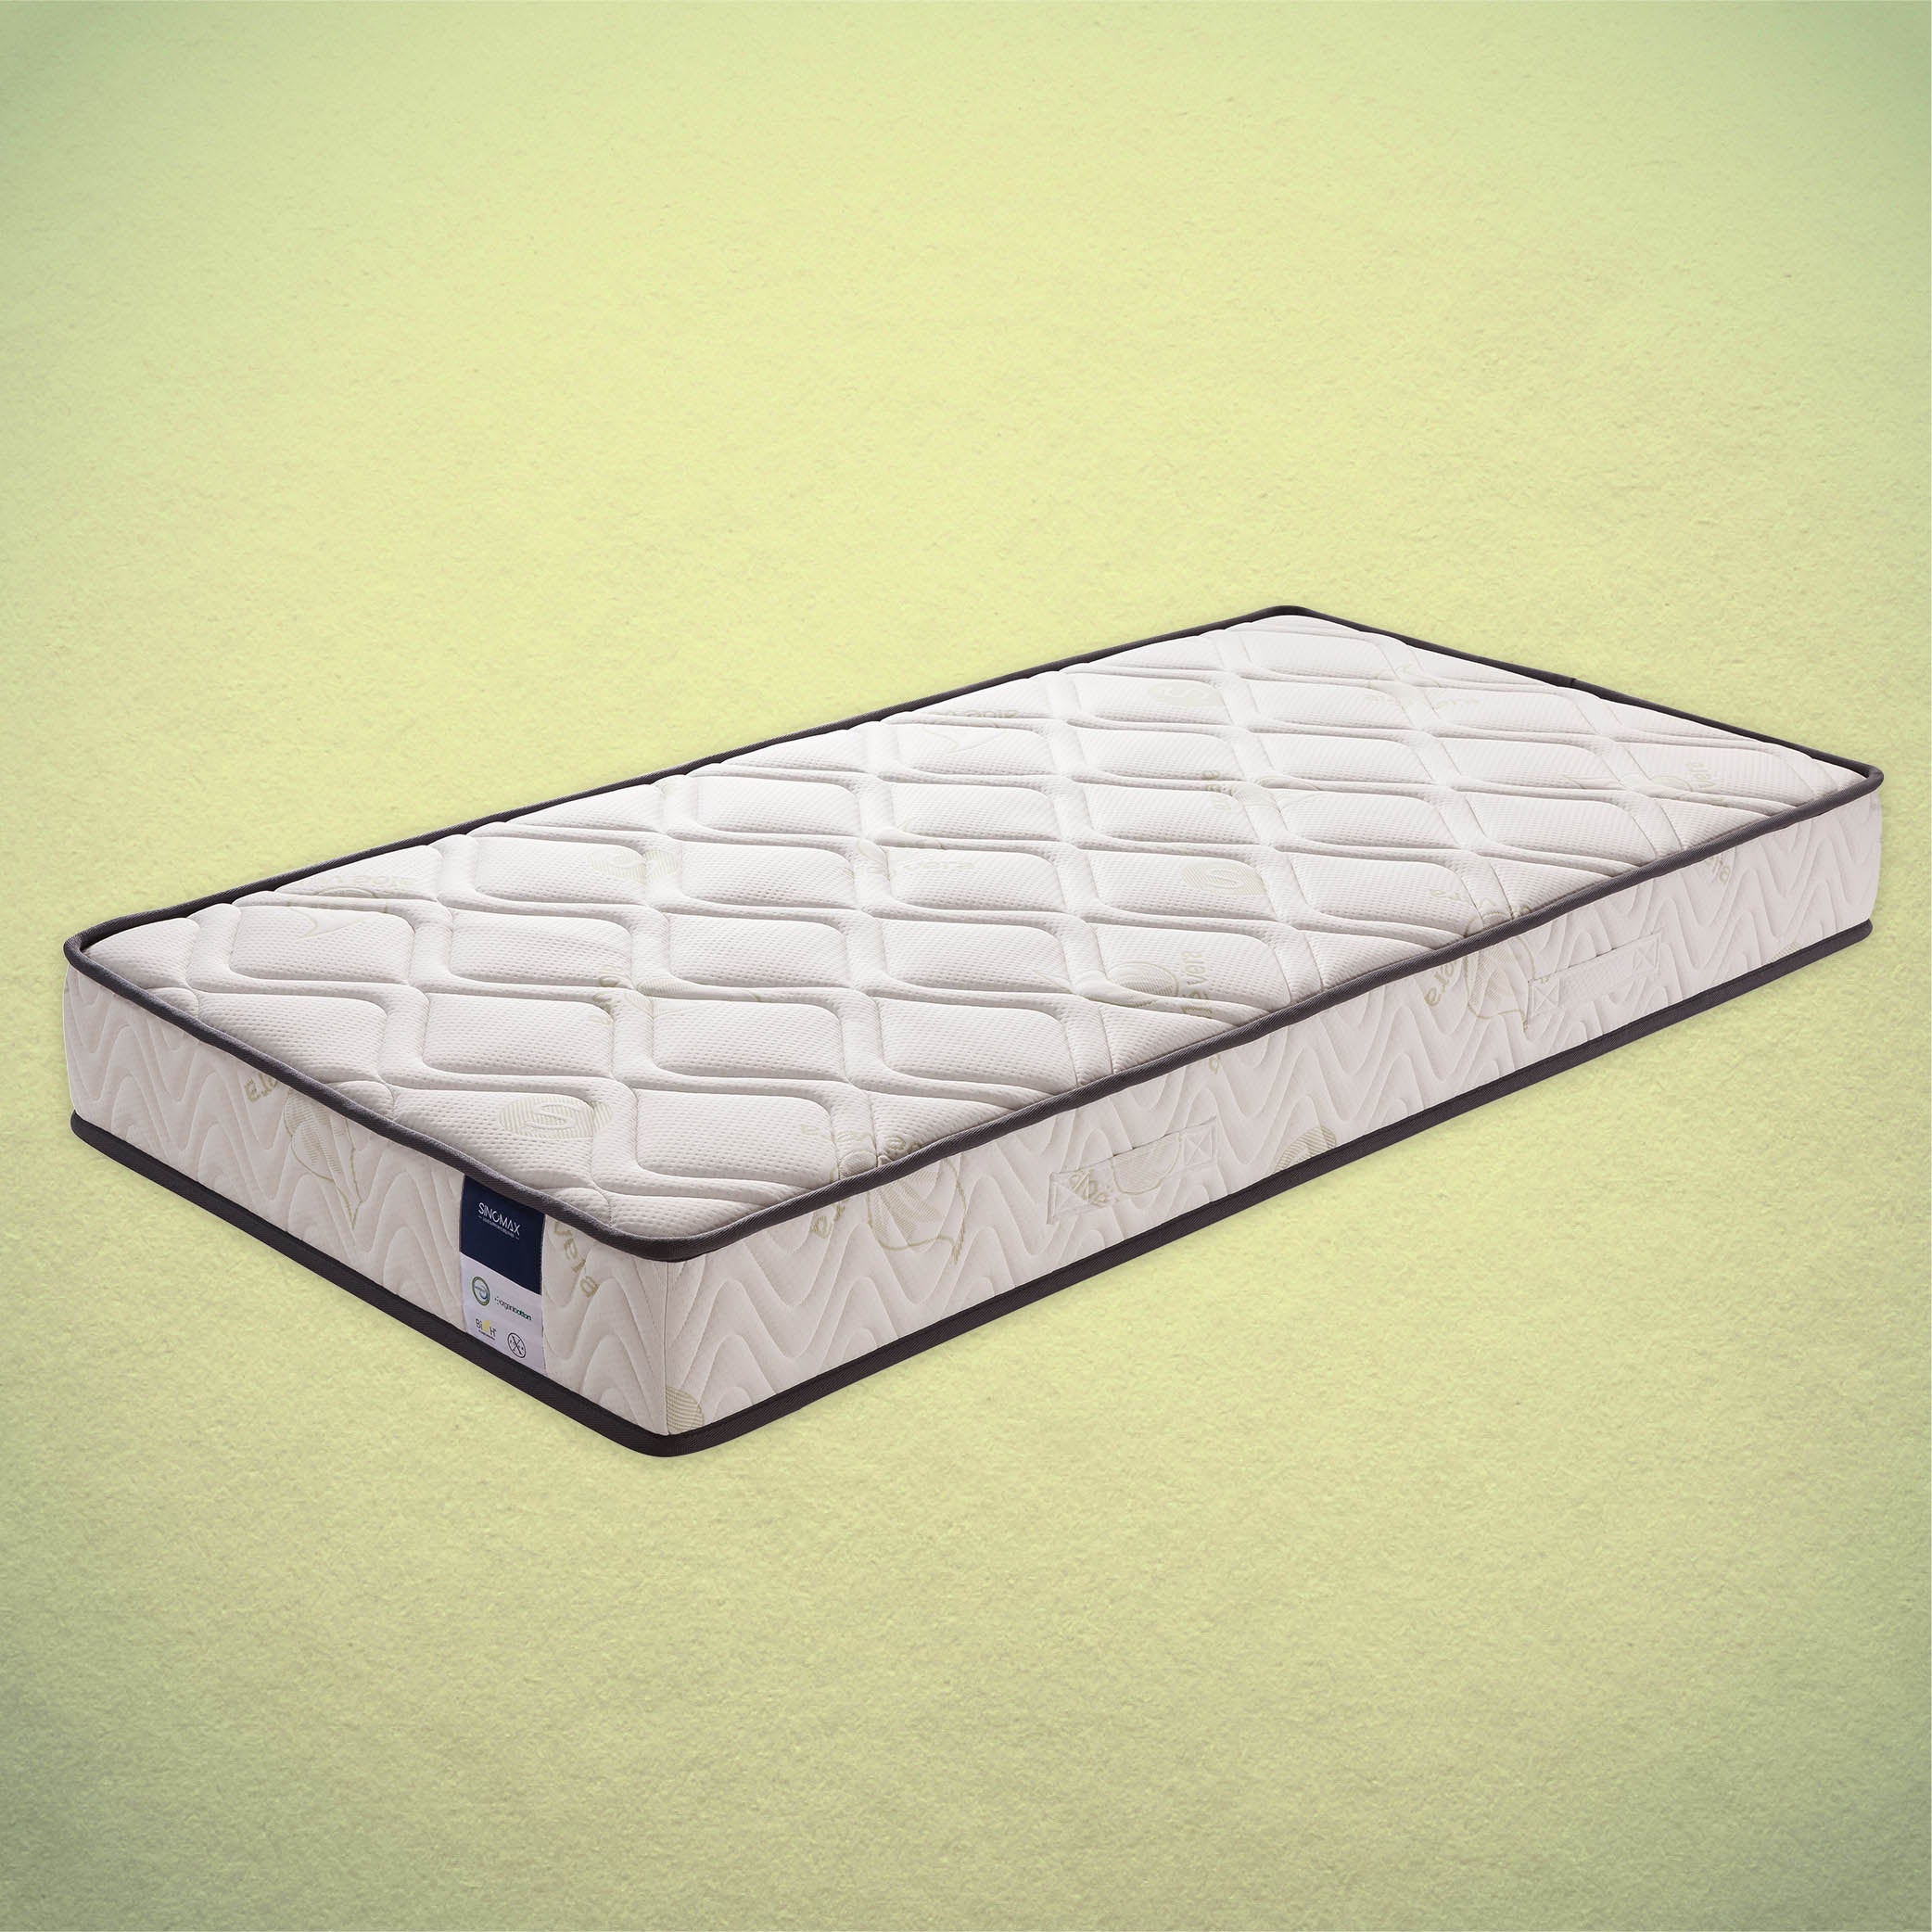 Double Backcare Mattress - Tailor-made size (48" W or below)